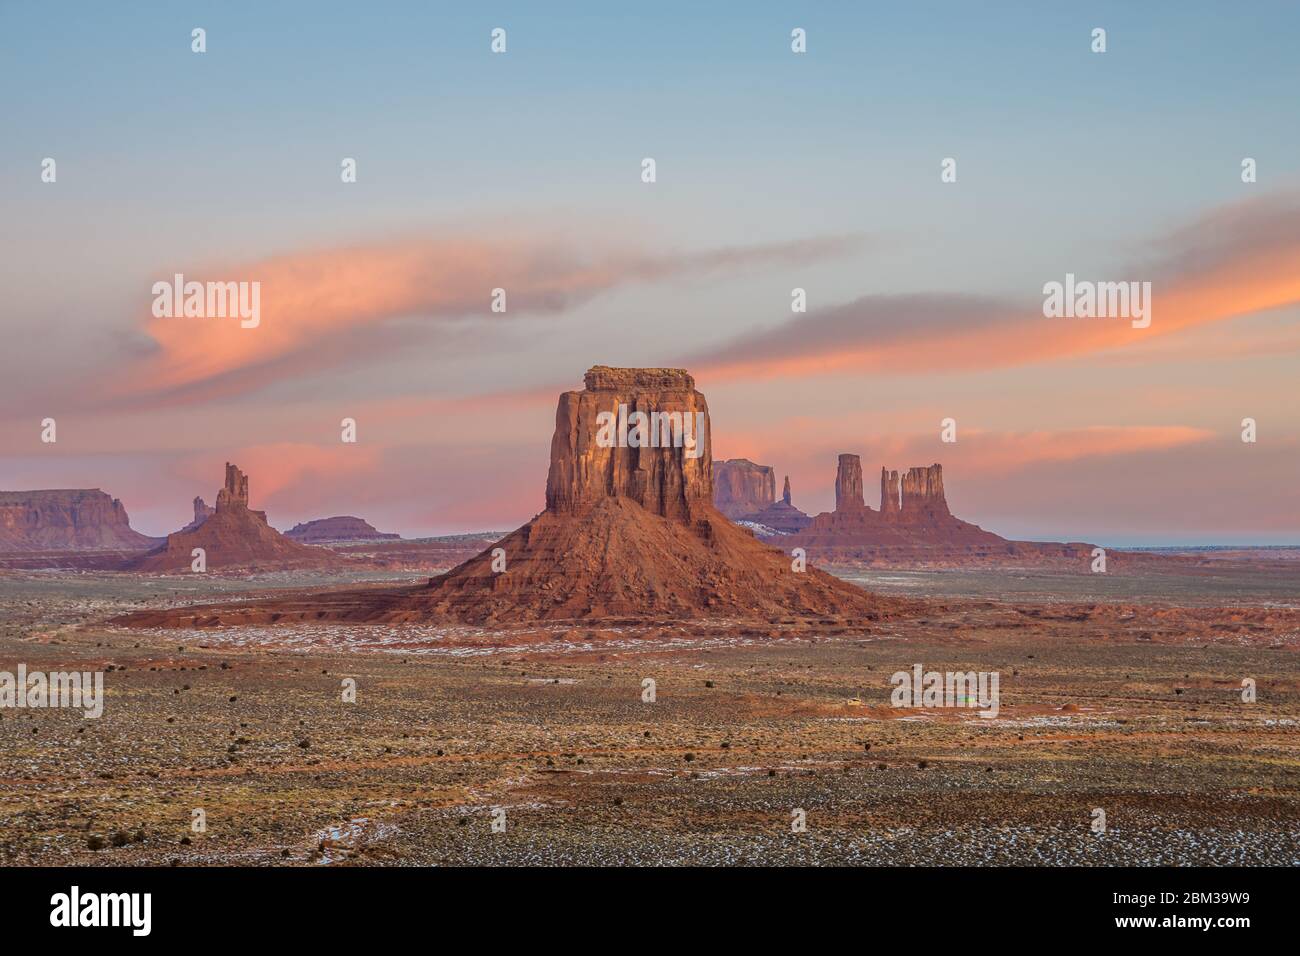 Panoramic view of Monument Valley Navajo Tribal Park at sunset Stock Photo